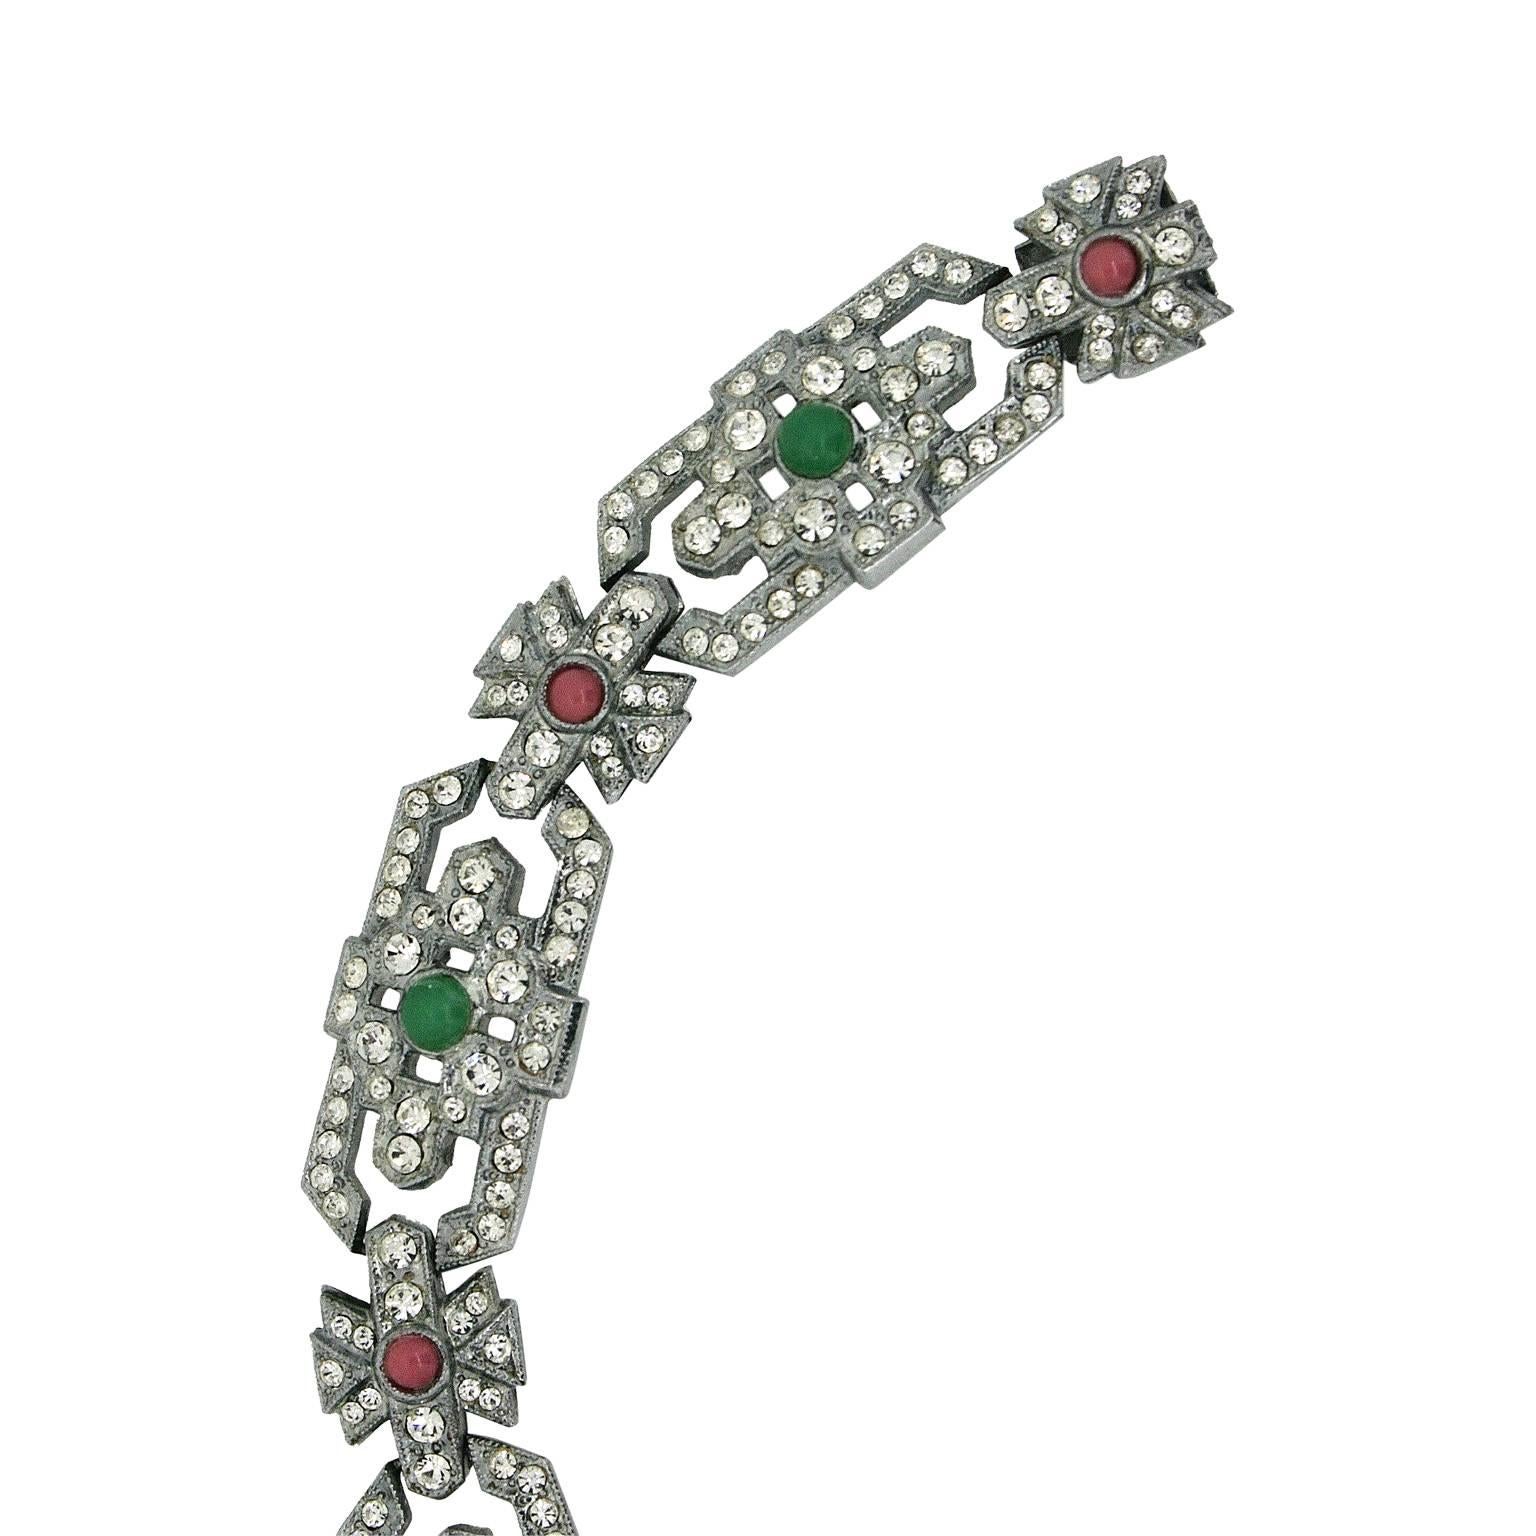 Shimmering and immaculate, this bracelet dates from the 1930s and is unsigned. 
Condition Report:
Excellent
The Details...
This silver tone bracelet features an Art Deco design encrusted with round faceted diamantes and detailed with pink and green